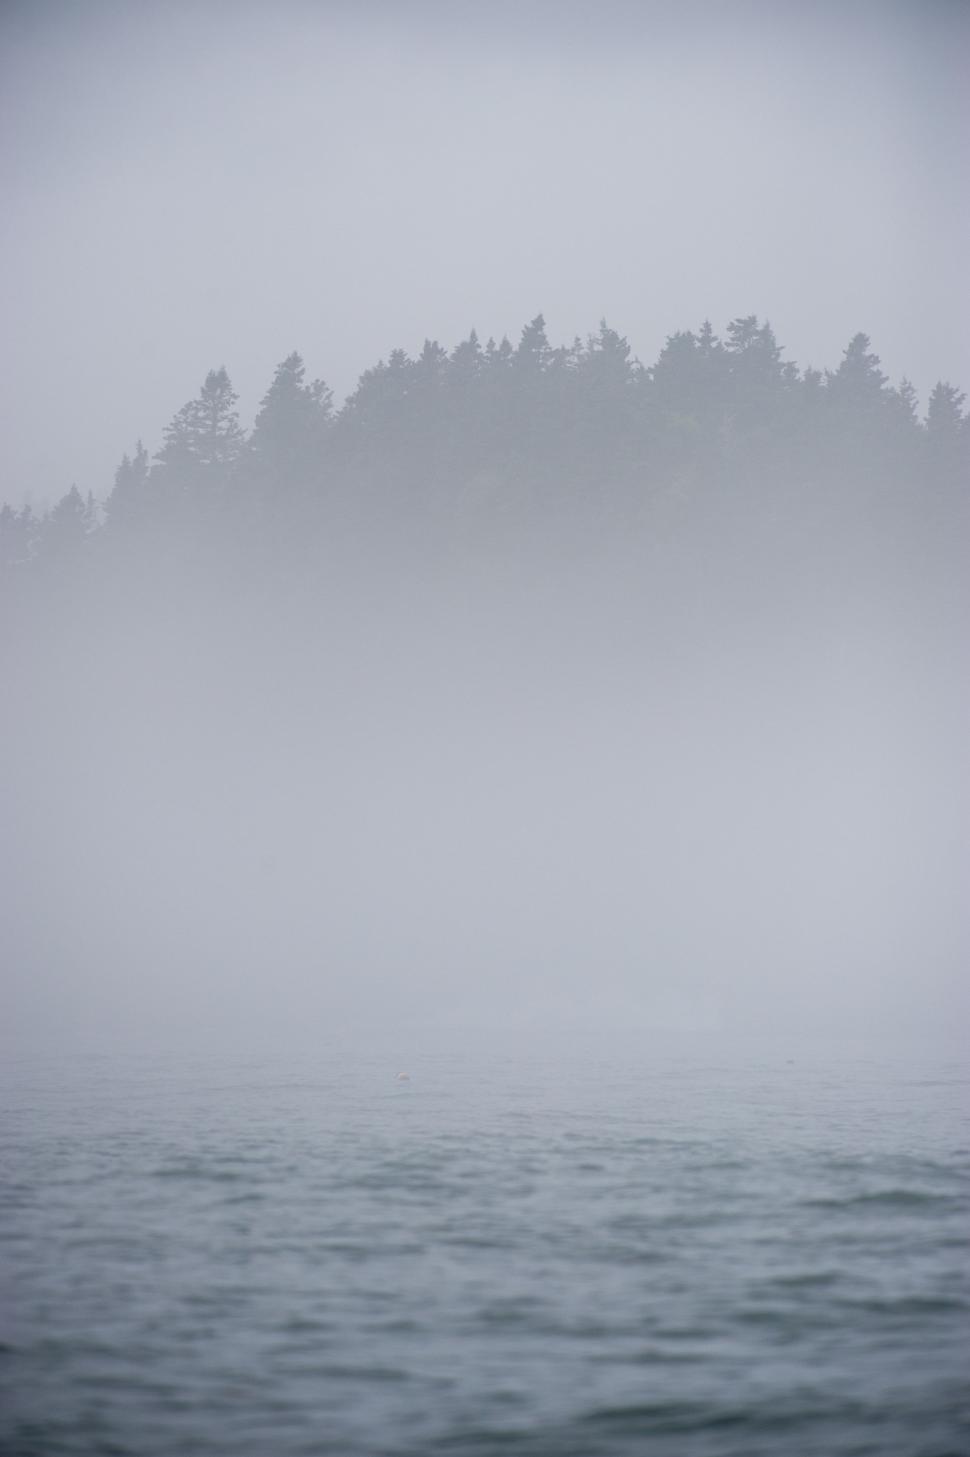 Free Image of Boat Sailing on Foggy Water 